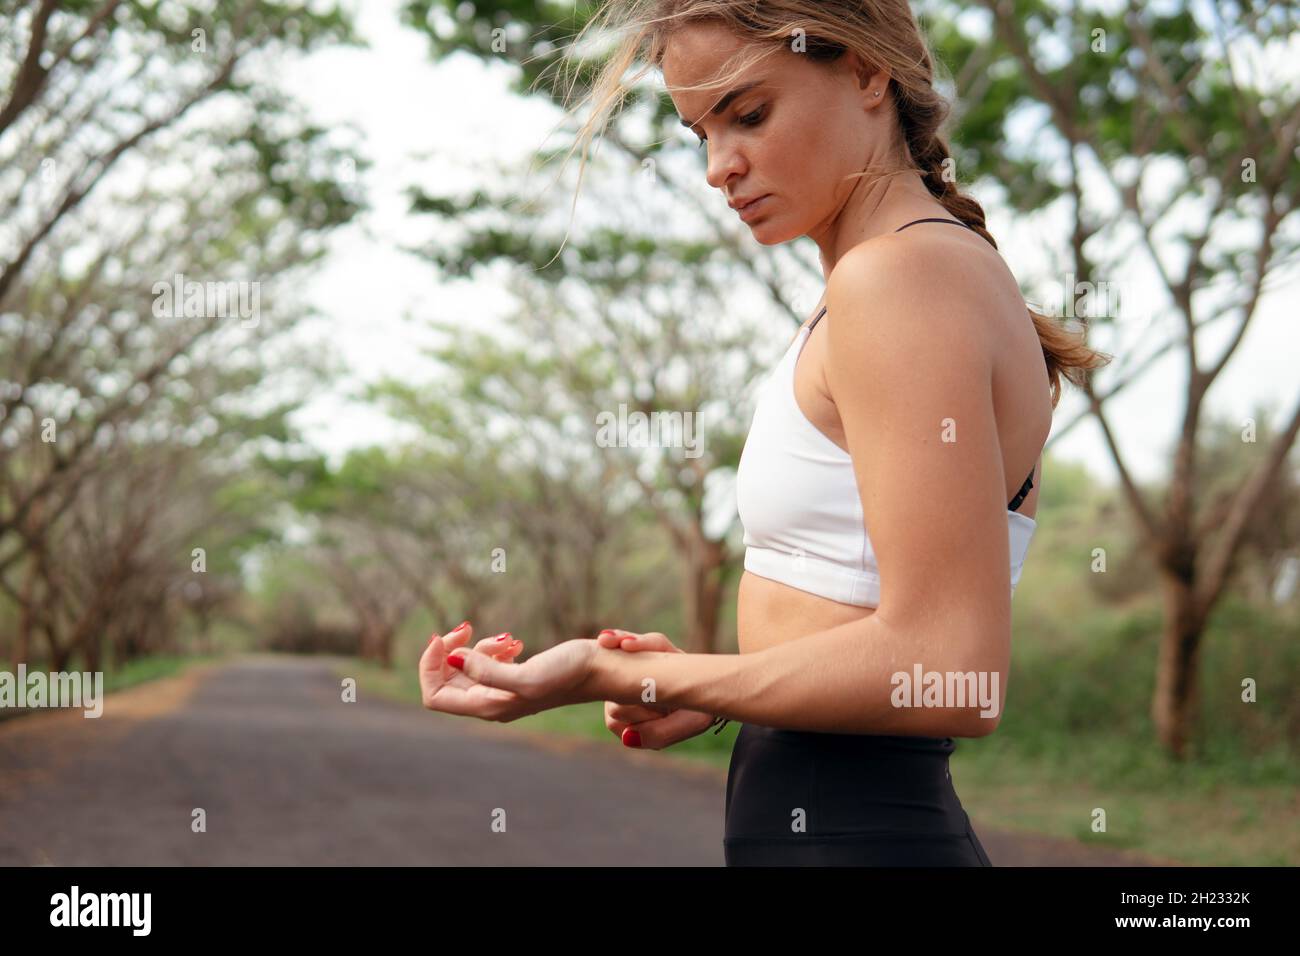 woman in sports wear checking pulse after running.  Stock Photo